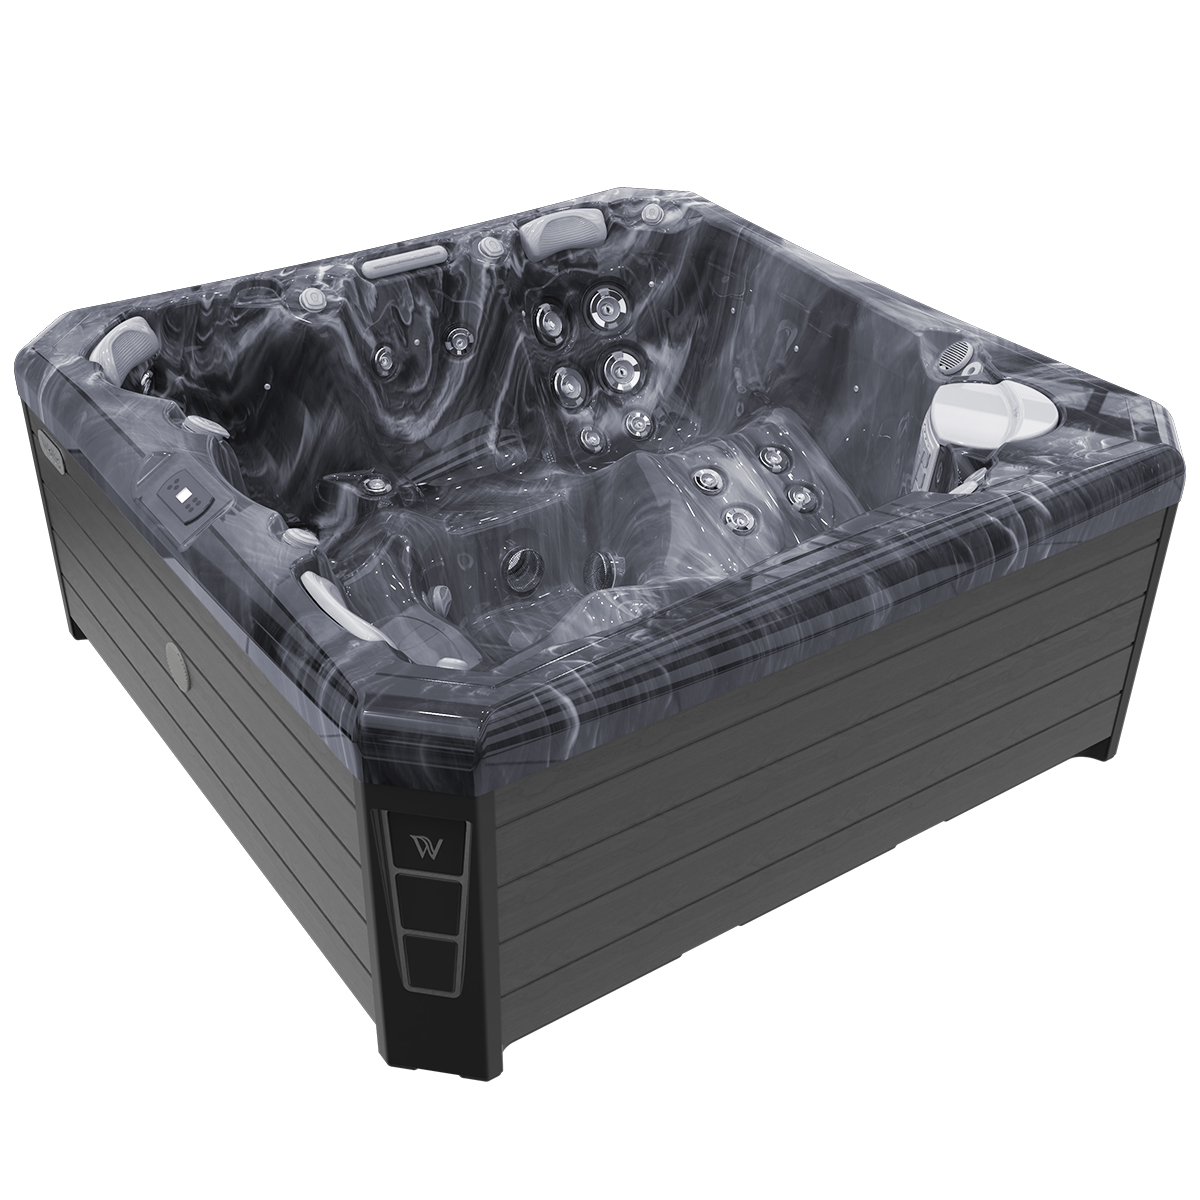 Wellis Palermo Life hot tub storm clouds